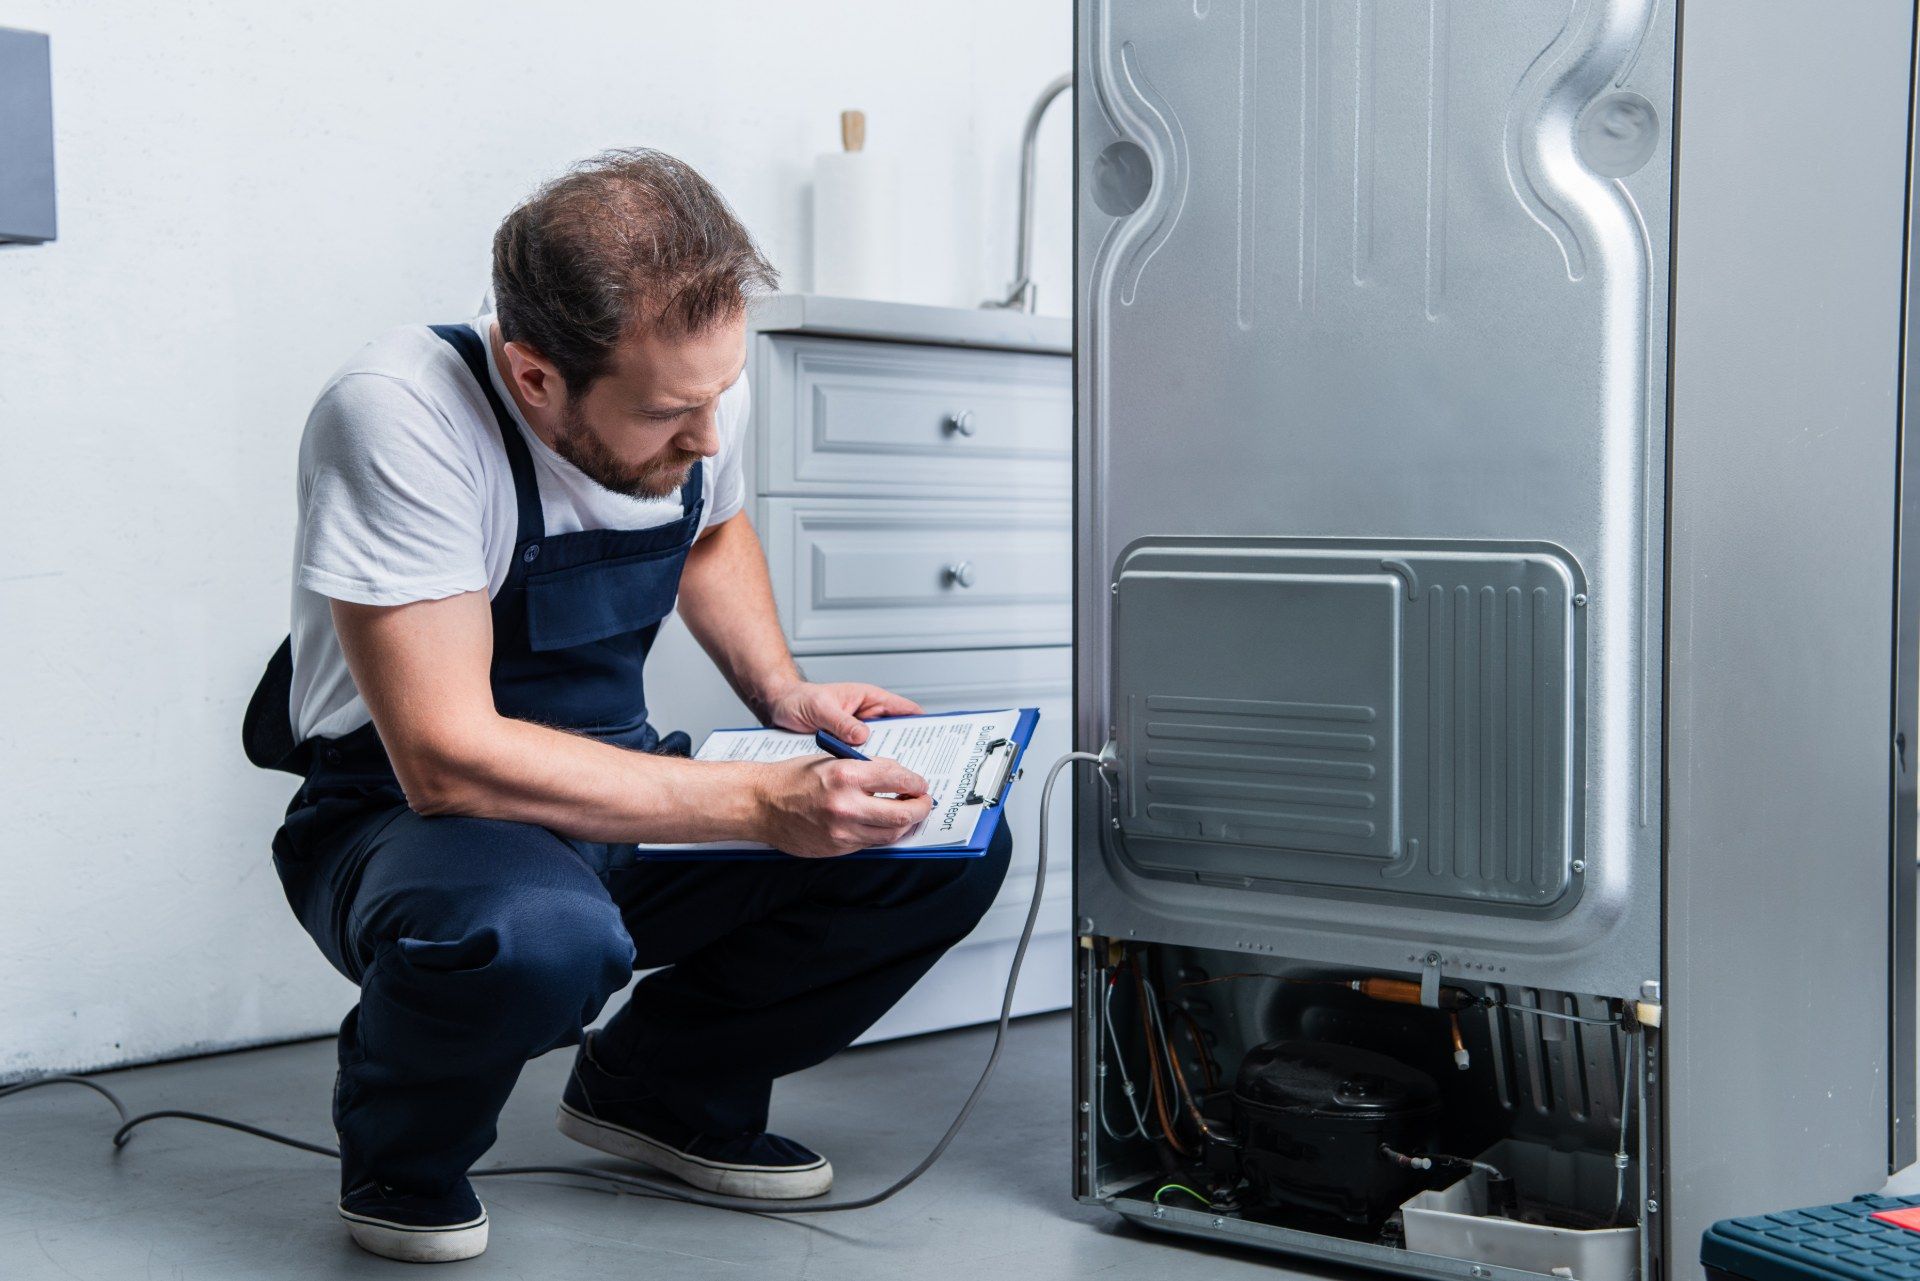 Repair technician works on the back of a silver refrigerator in a kitchen - lg electronics refrigerators